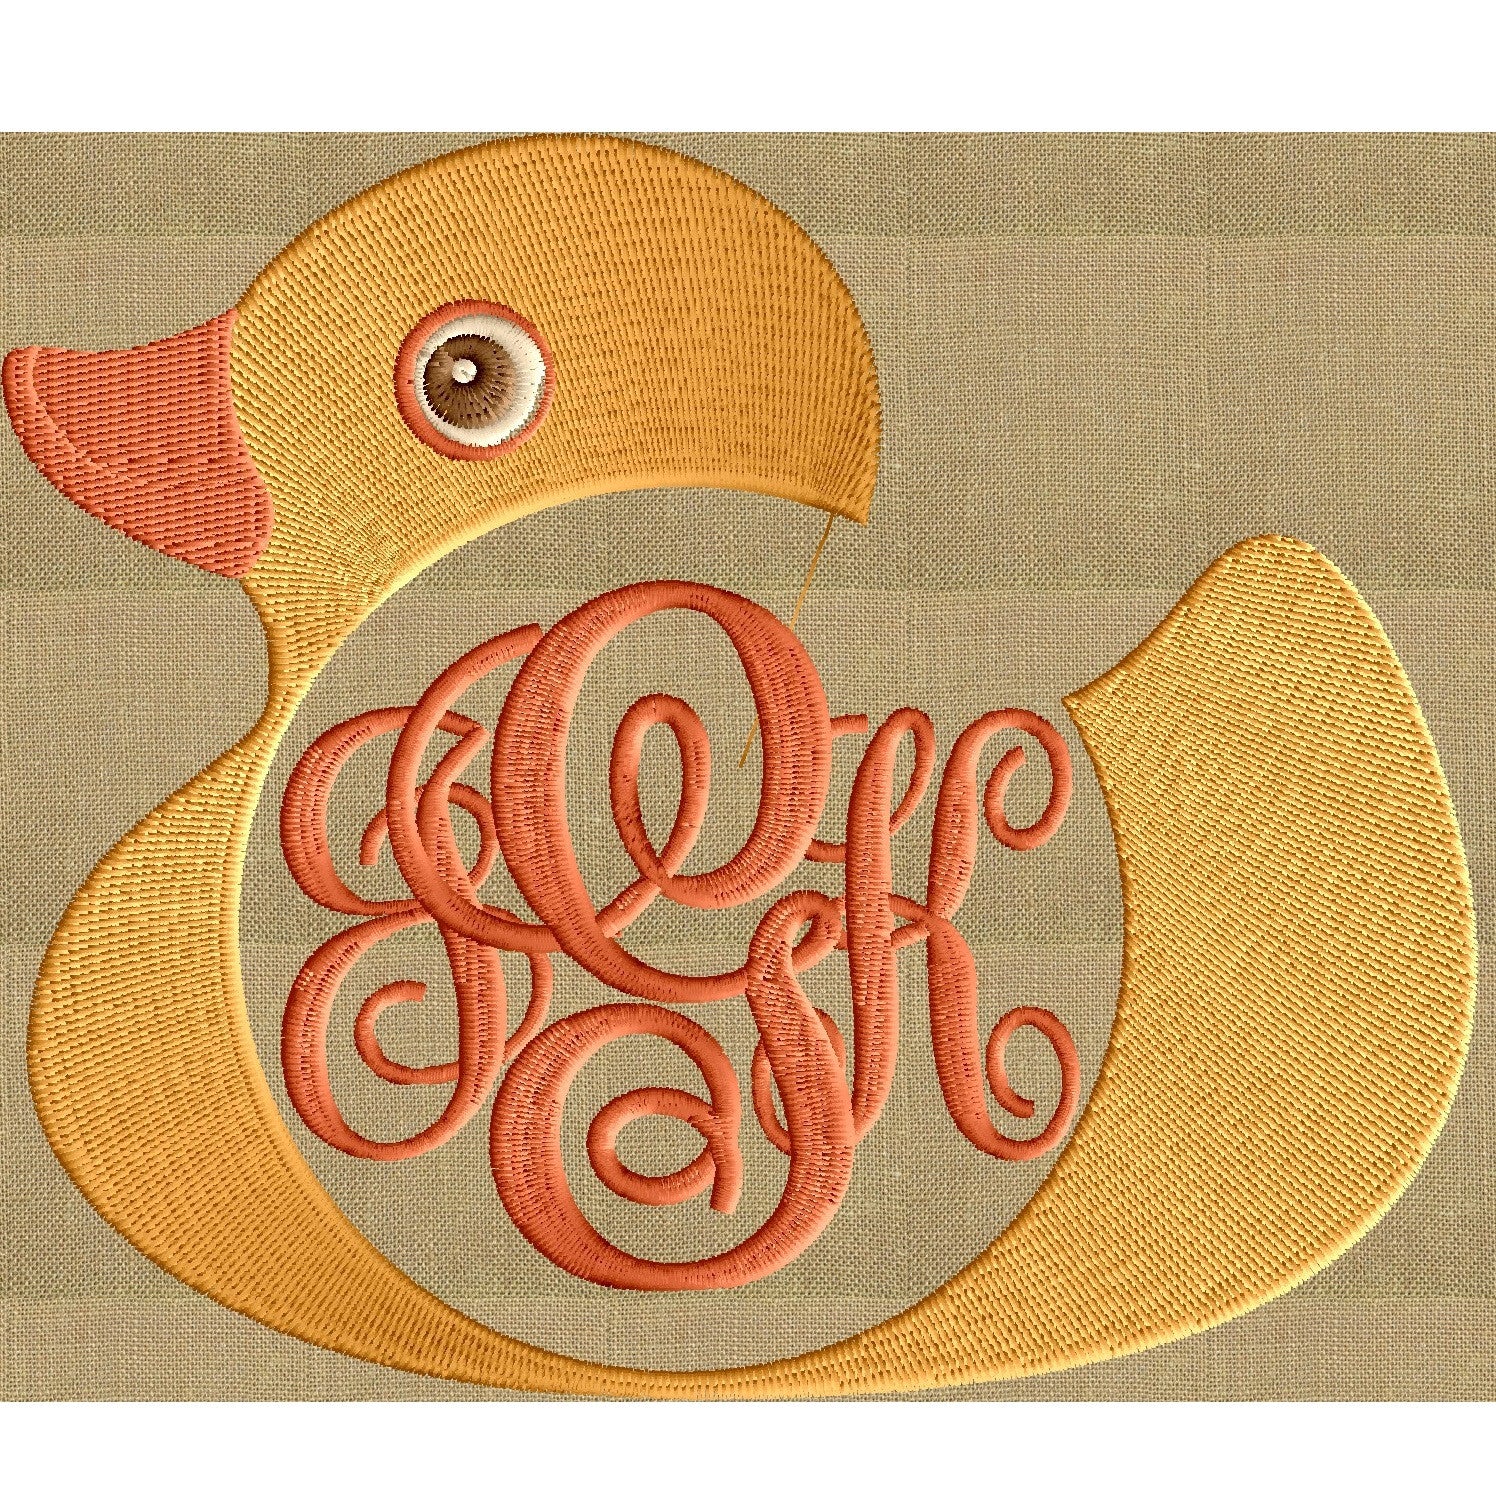 Duck - Retro Rubber Ducky Frame Monogram EMBROIDERY DESIGN -Font not included - animals